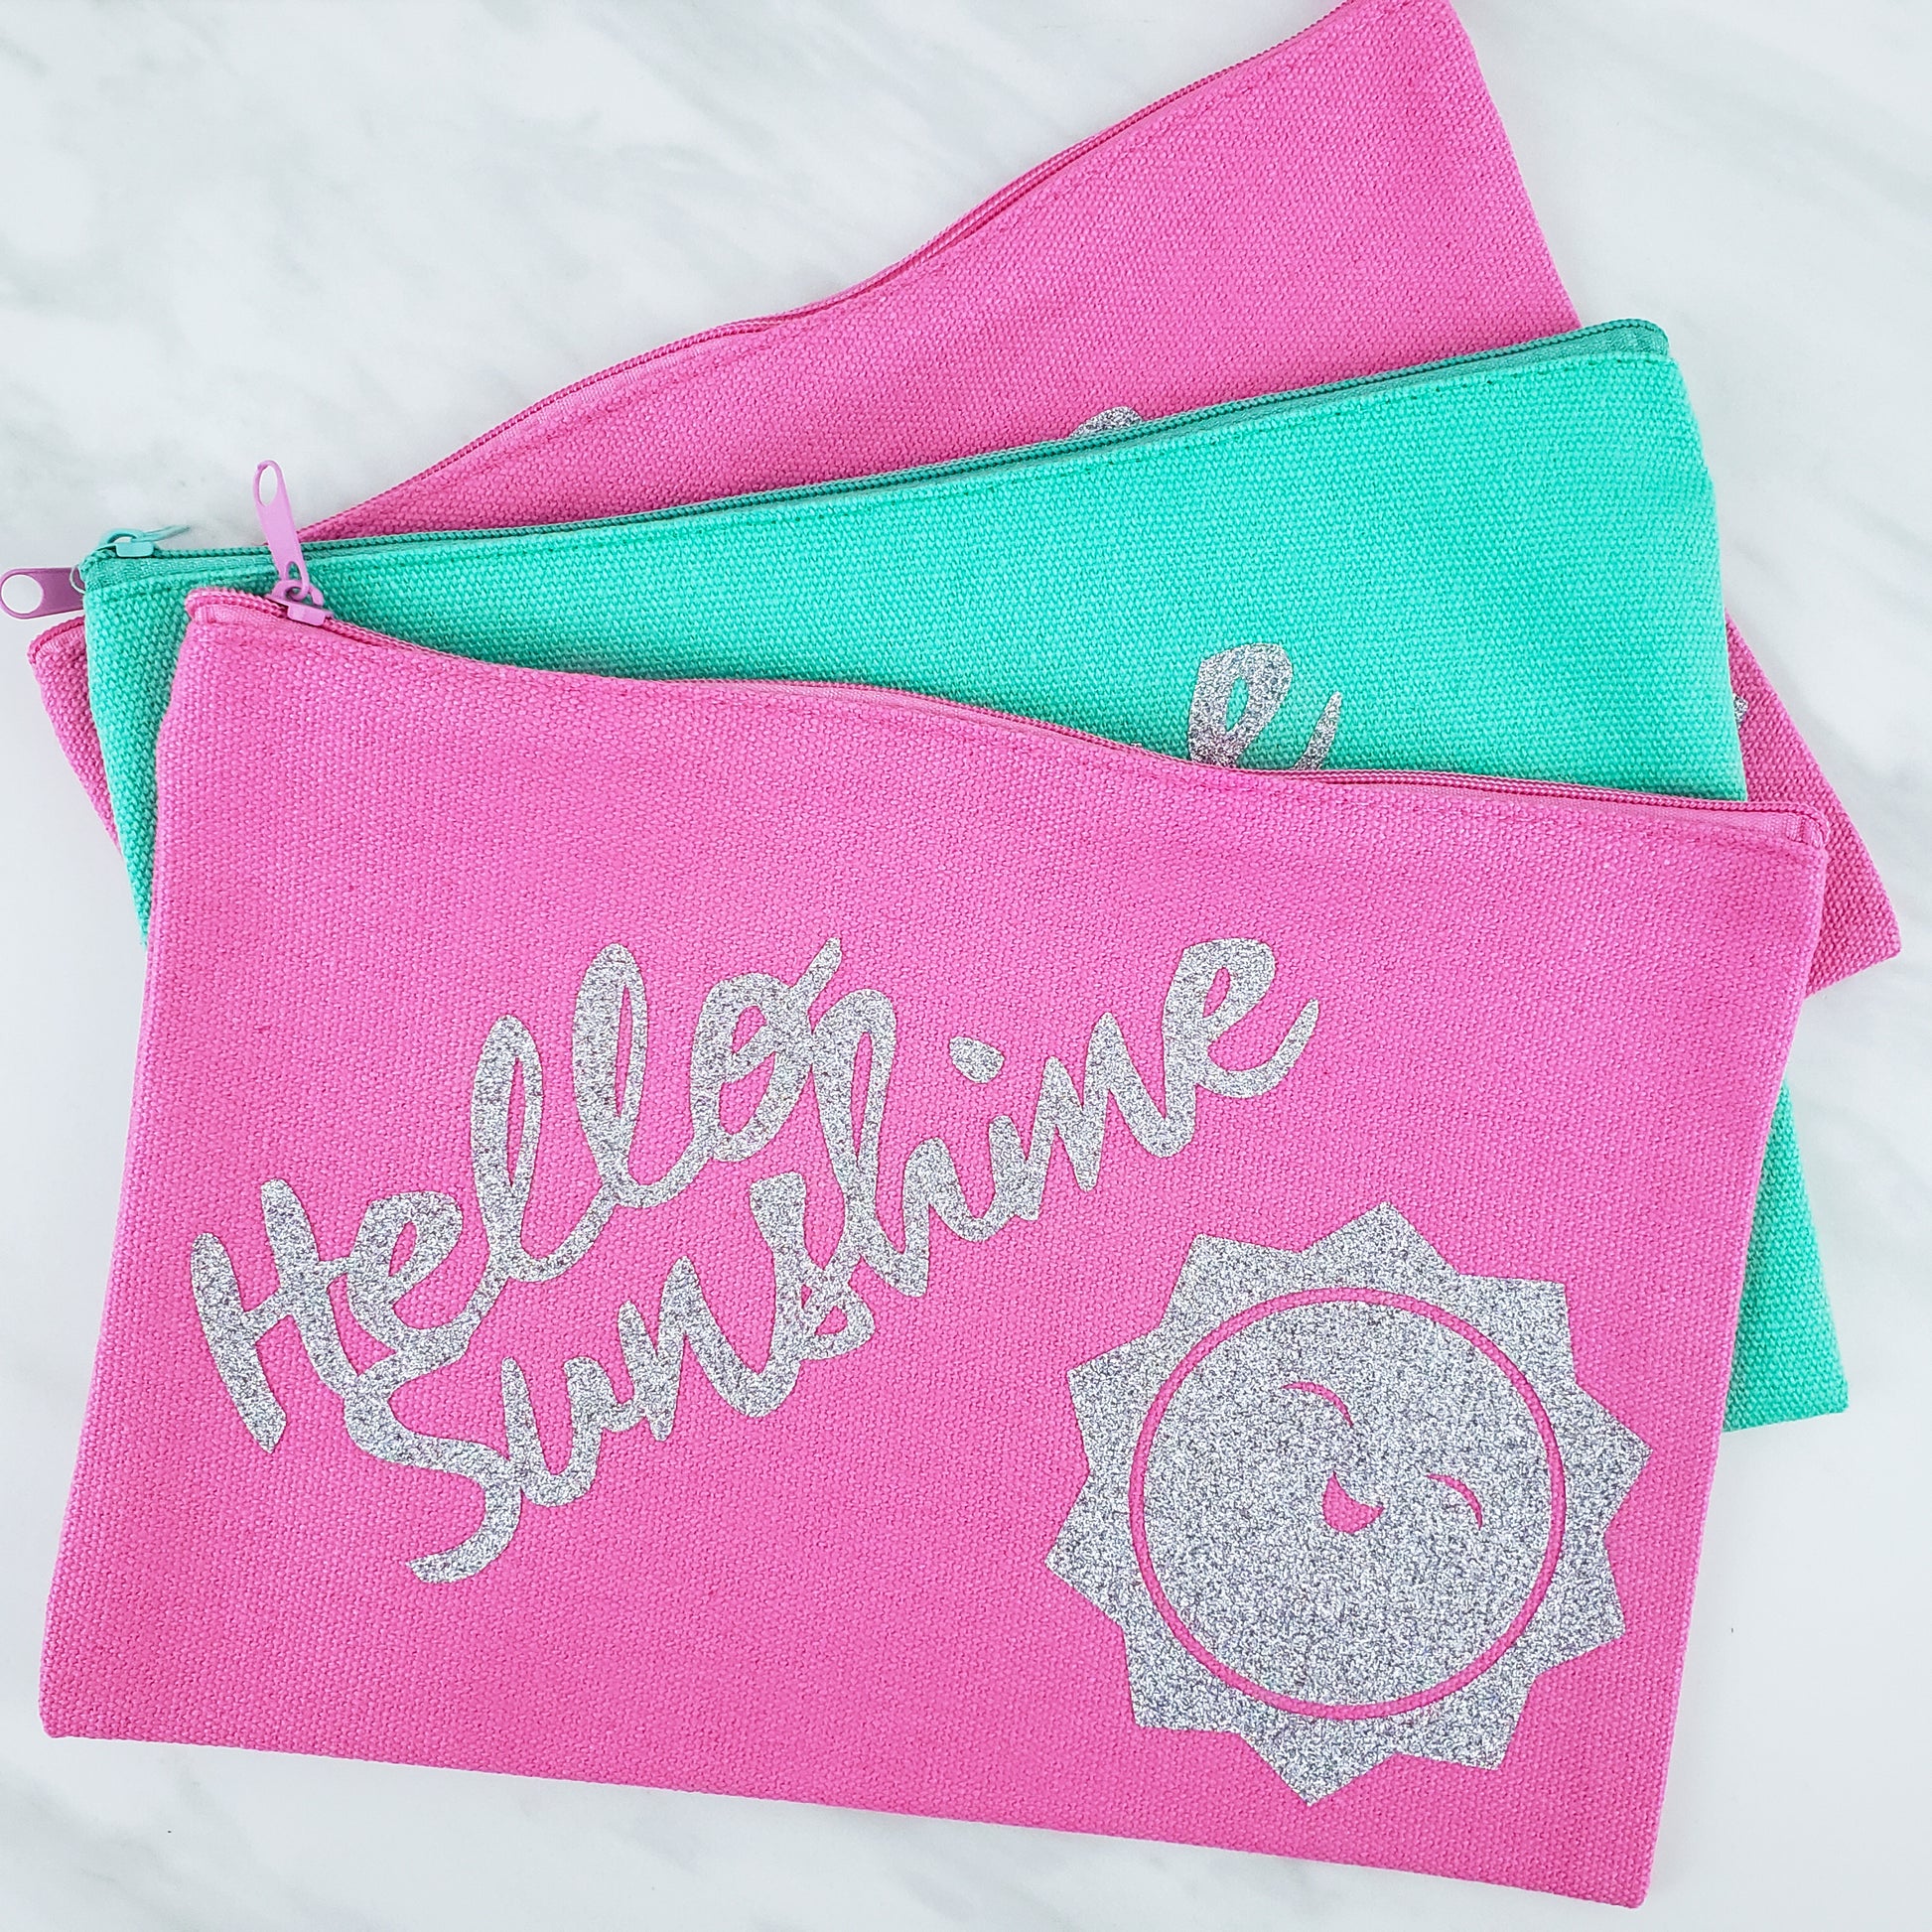 Pink and teal cosmetic bags with "hello sunshine" printed in silver